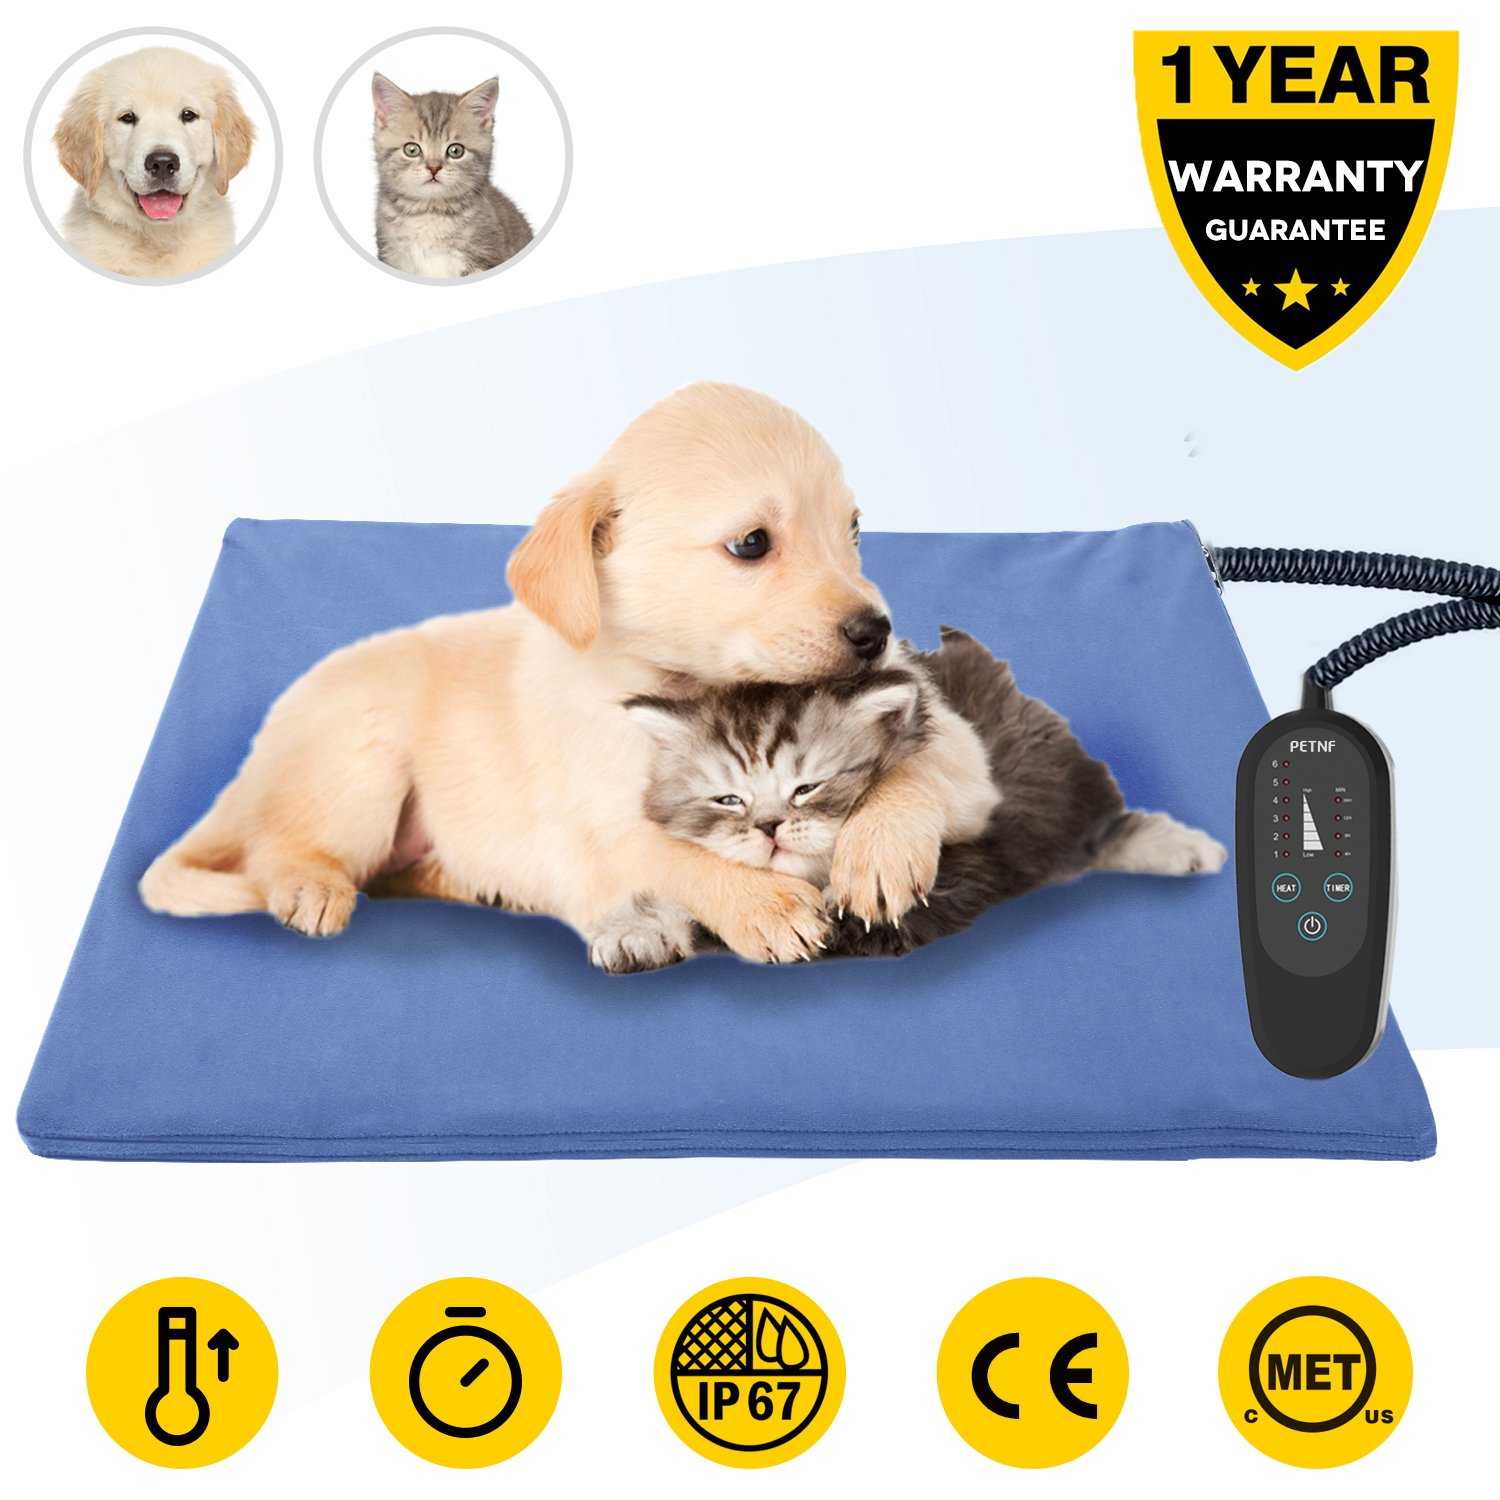 Upgraded Pet Heating Pad with Timer by PETNF